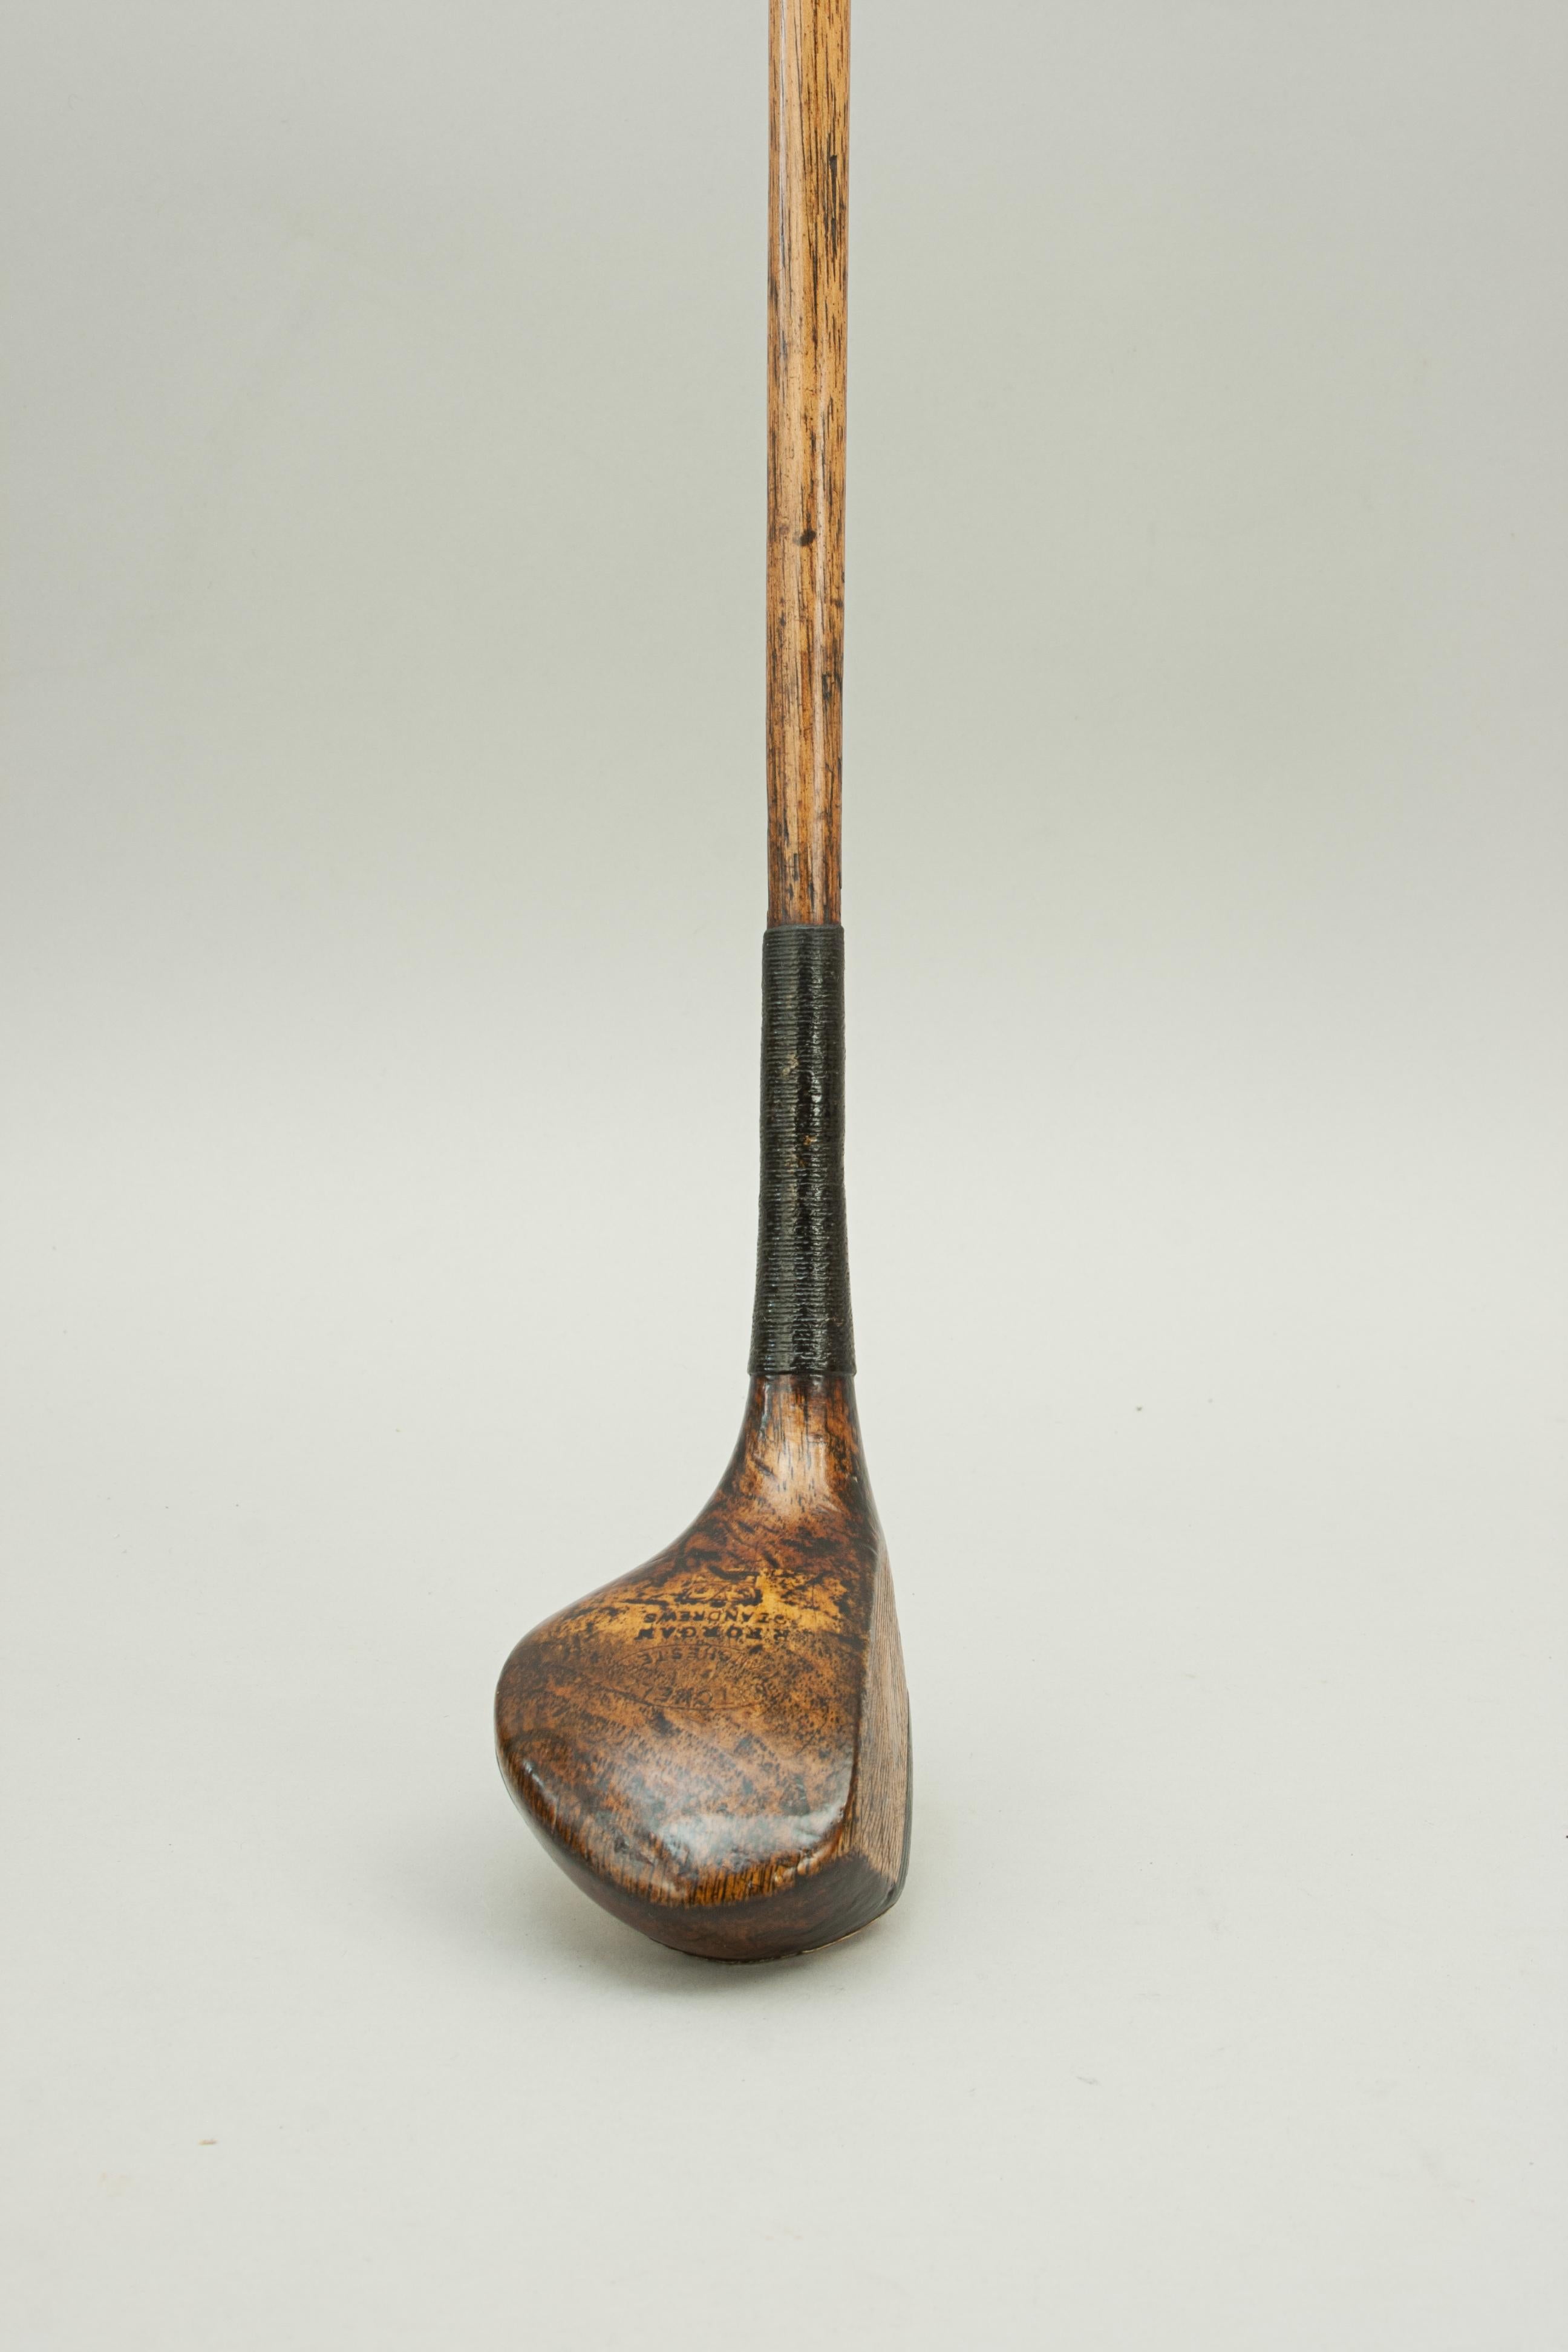 Early 20th Century Golf Club, Hickory Brassie by R. Forgan of St Andrews